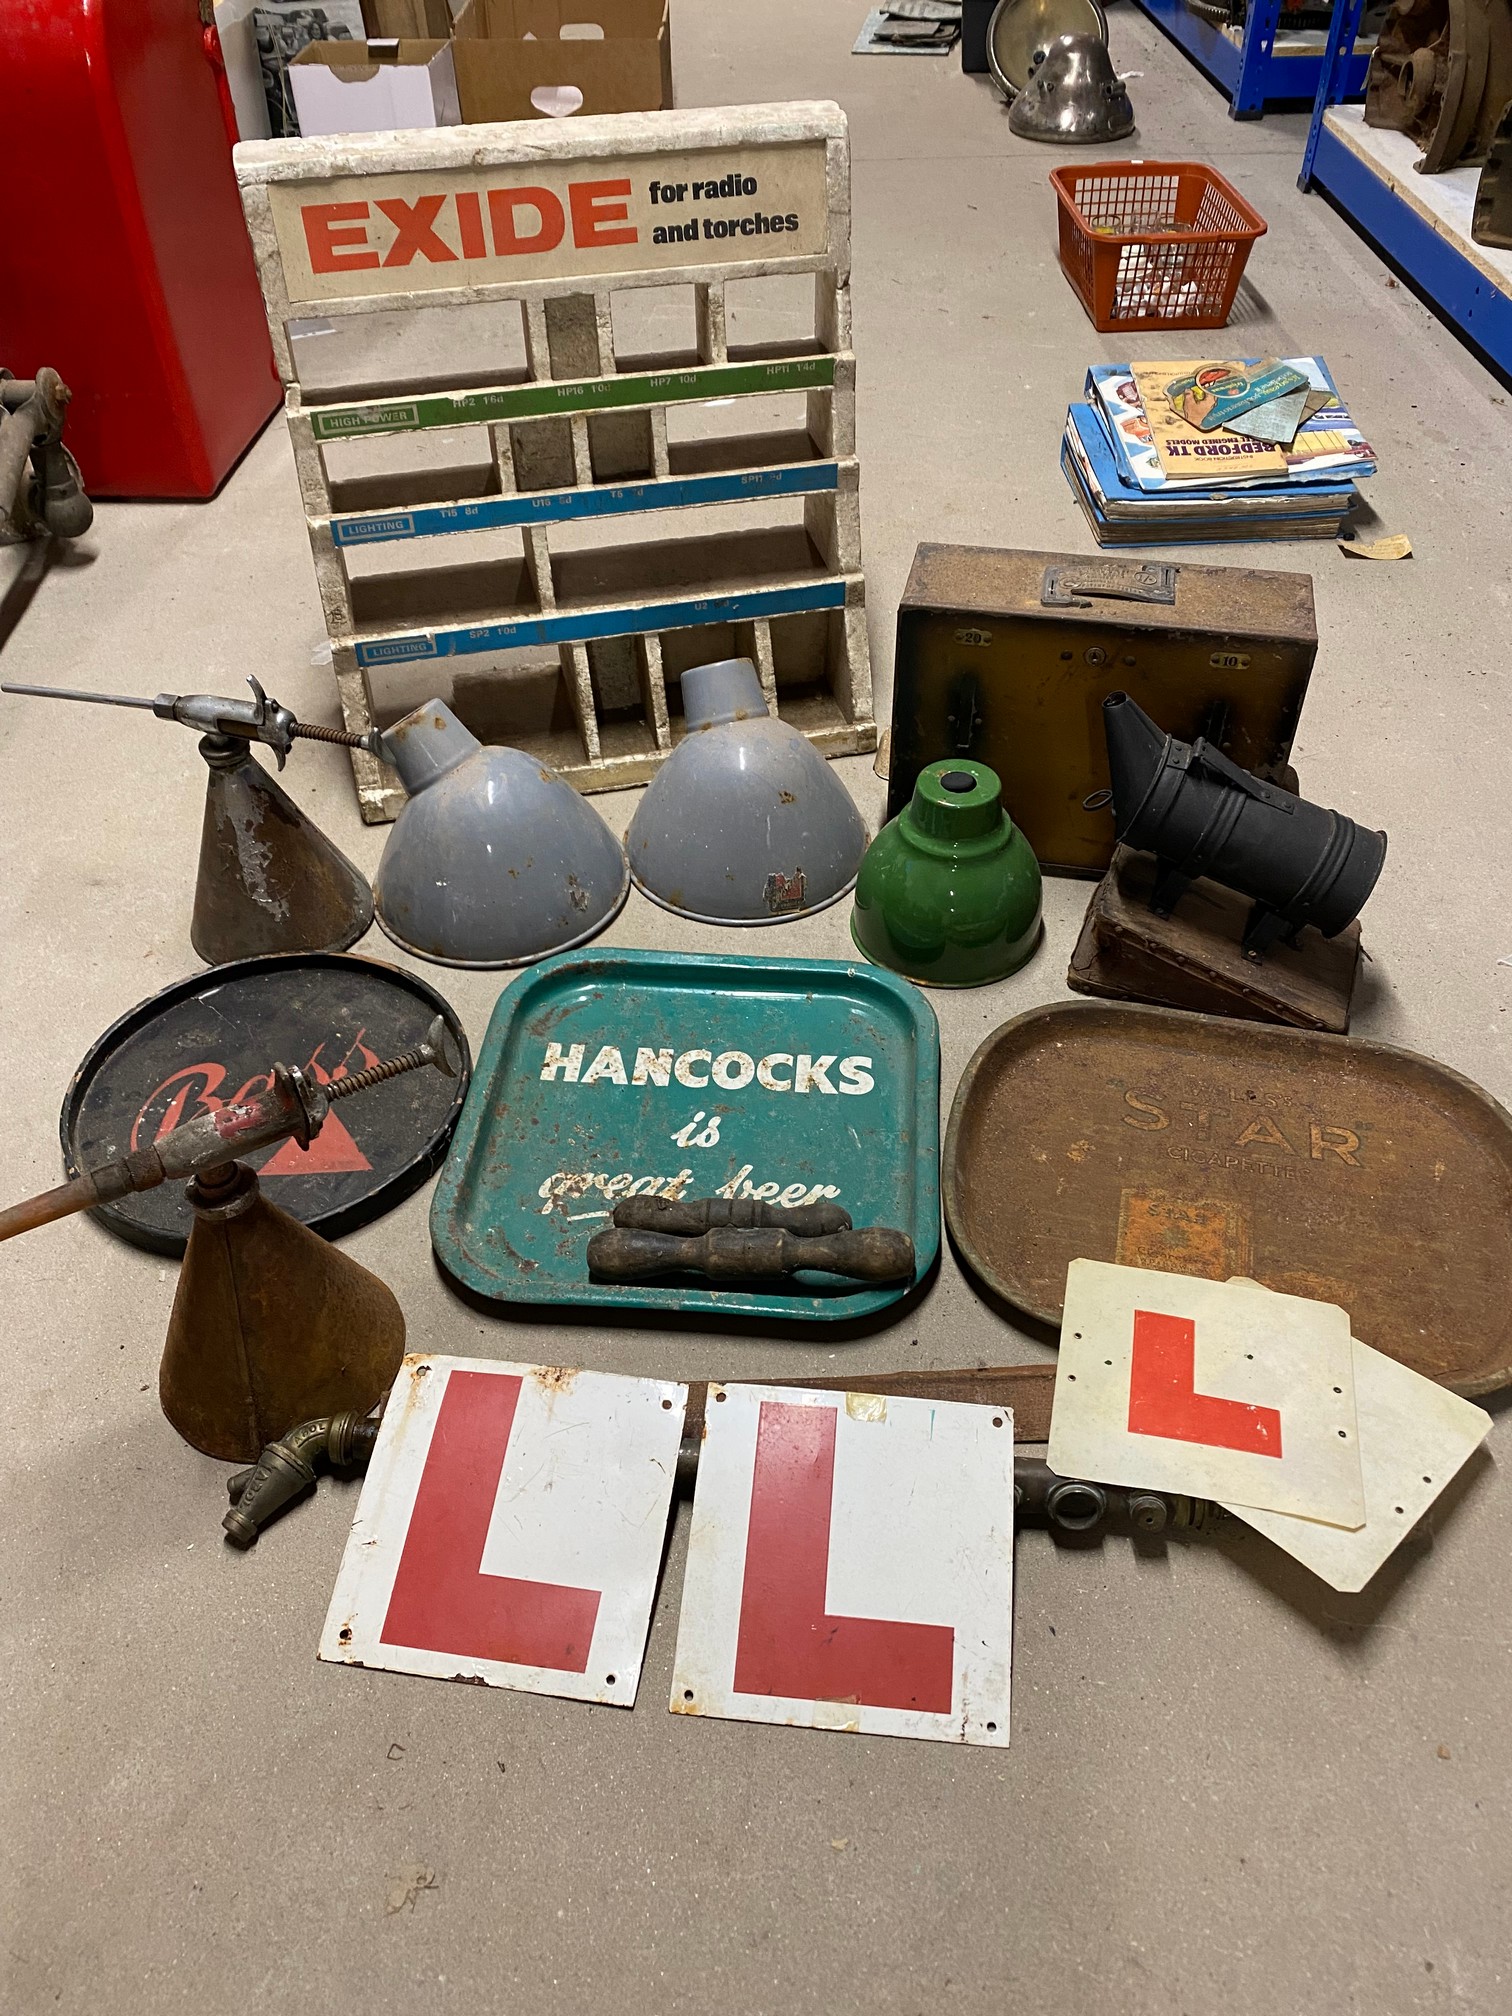 A quantity of mixed collectables including enamel shades, a bee keeping smoker, Redex dispensers